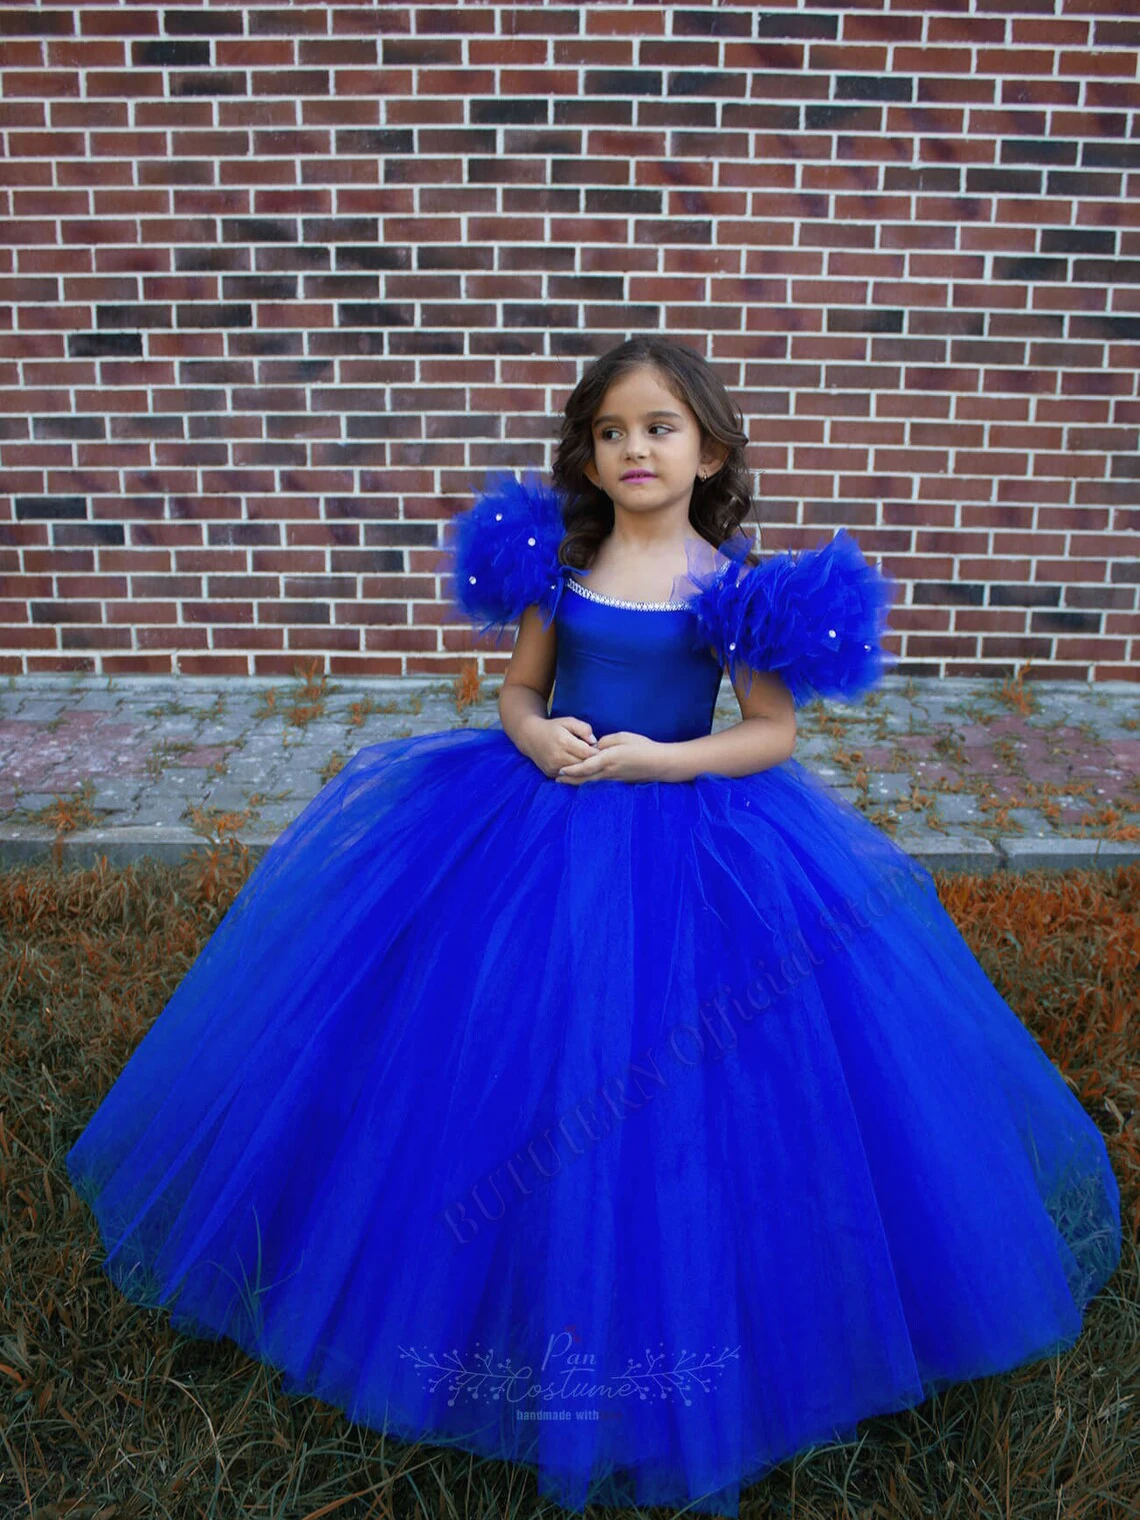 

Royal Blue Tiered Princess Flower Girl Dresses Ball Gown Baby Girls Couture Birthday Wedding Party Dresses Costumes Customised